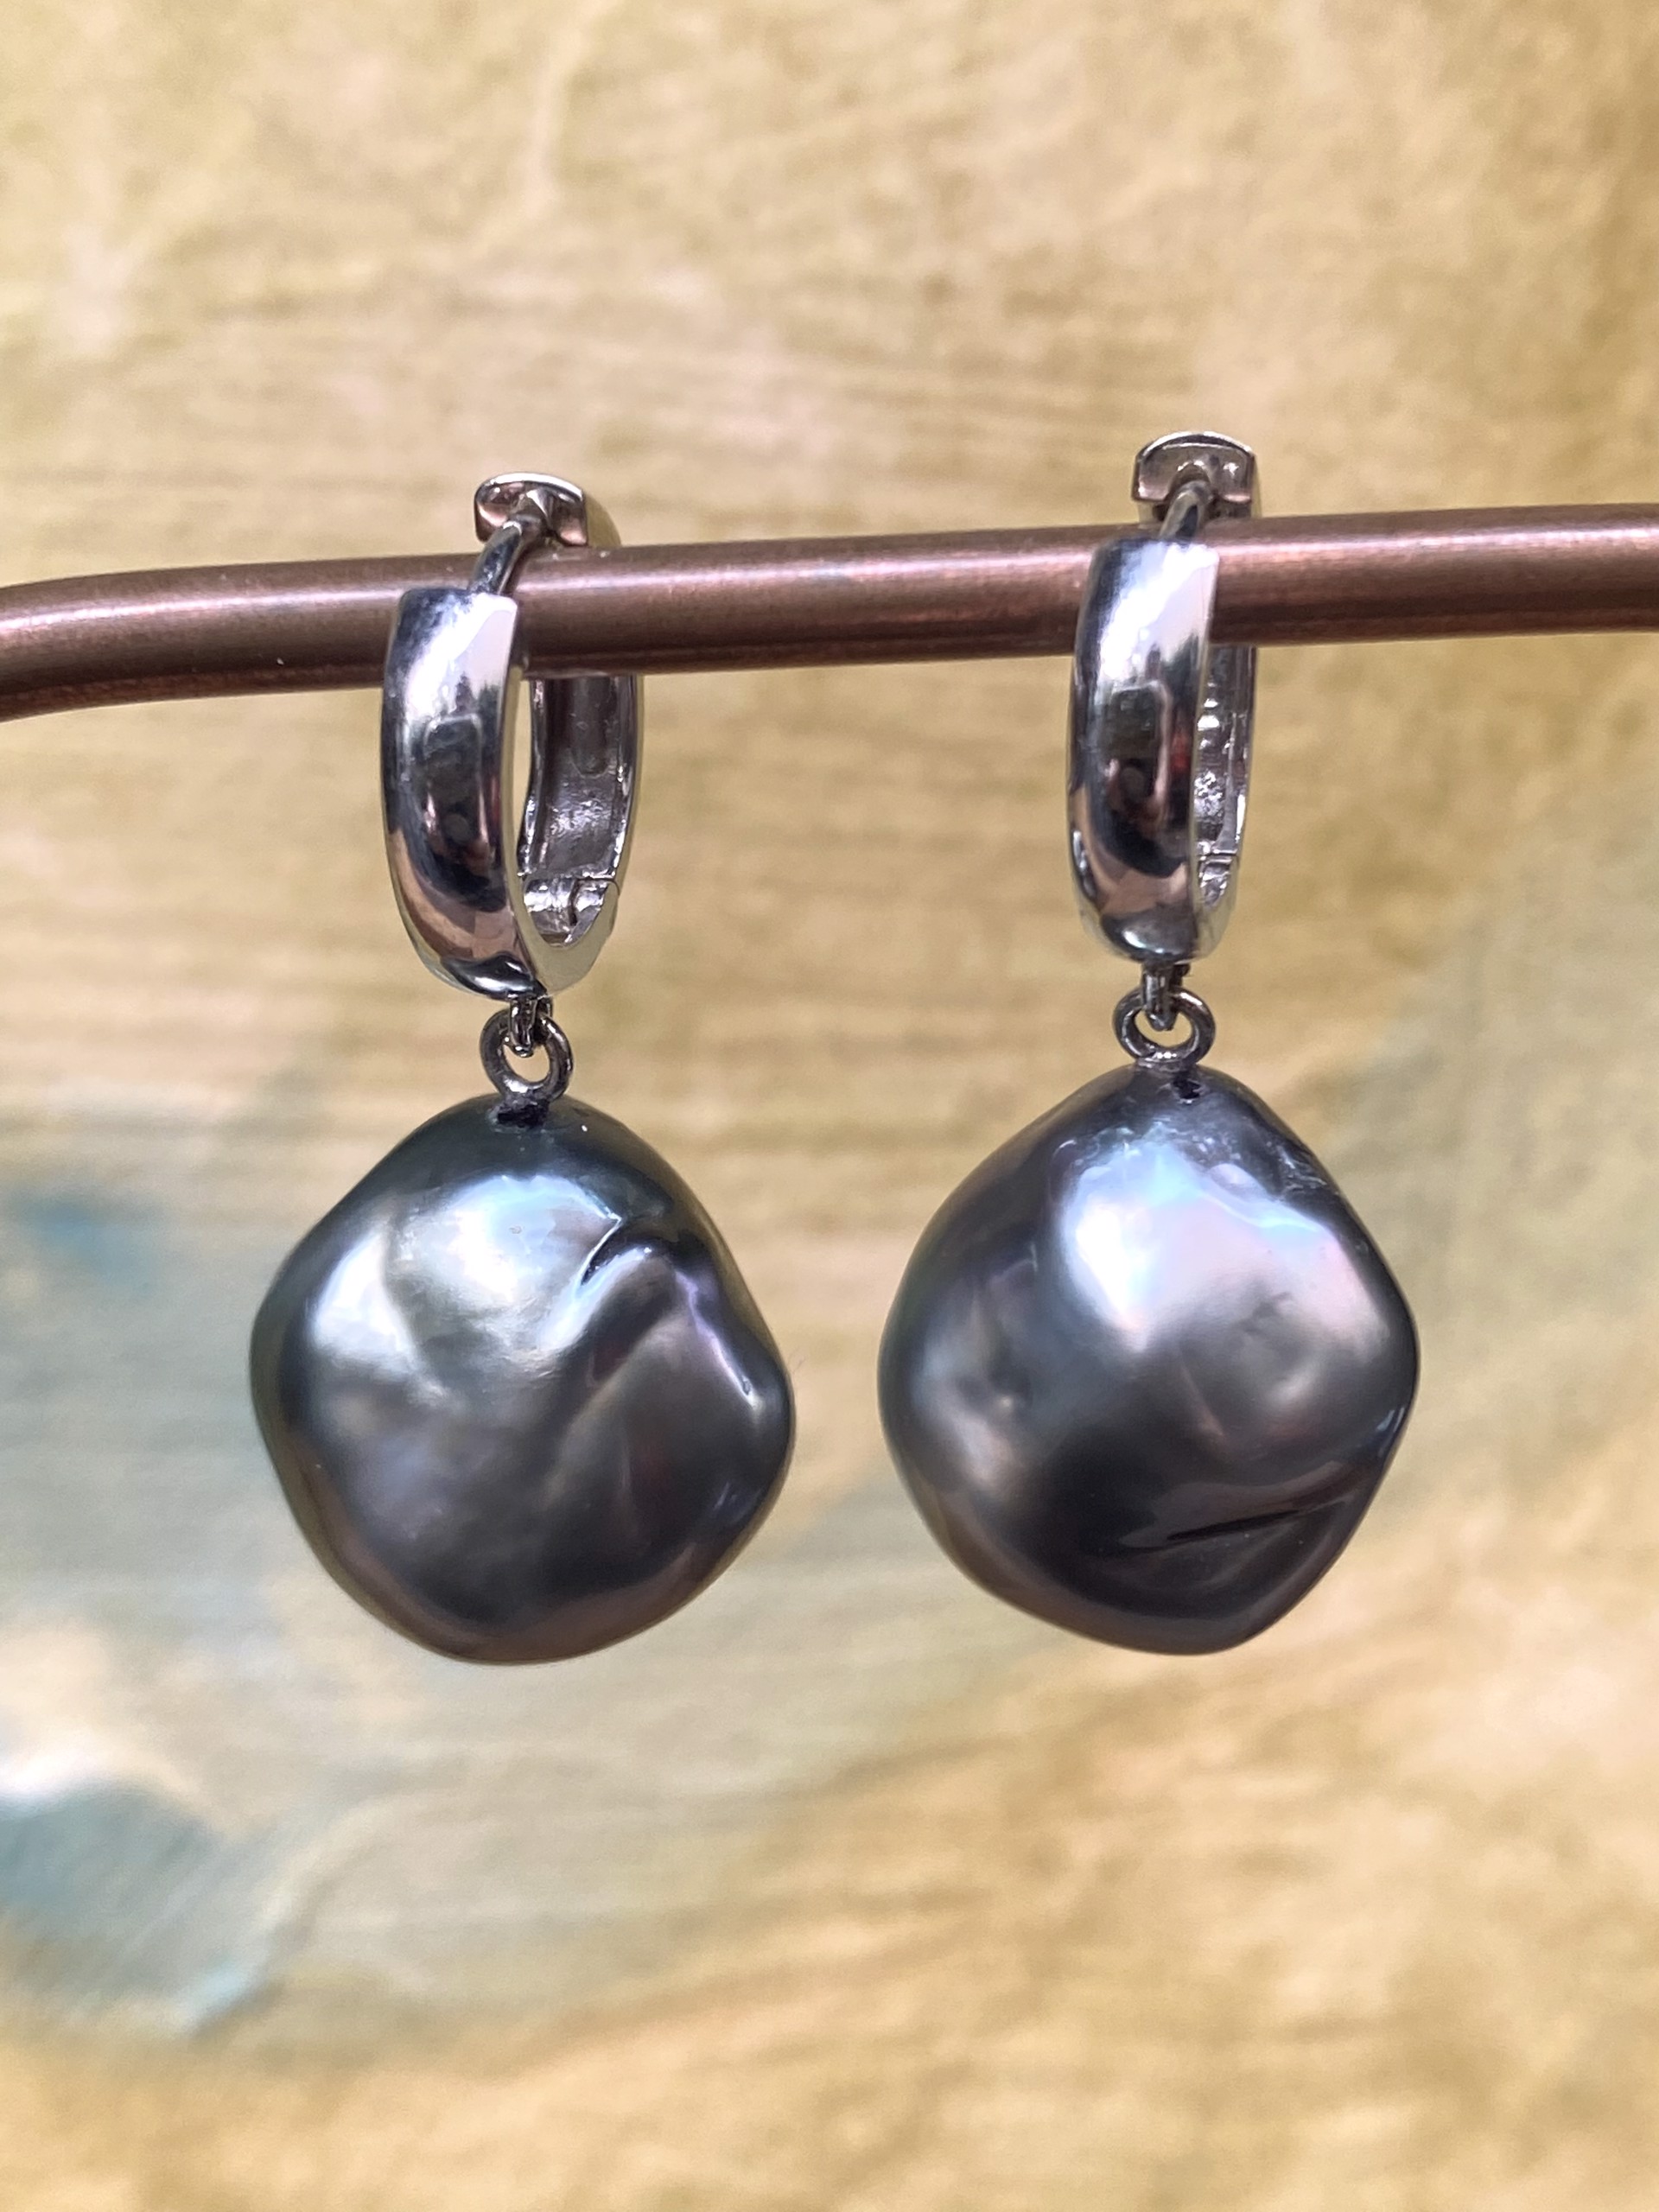 14K White Gold Cuffs with Baroque Tahitian Pearls 16x14 mm by Sidney Soriano